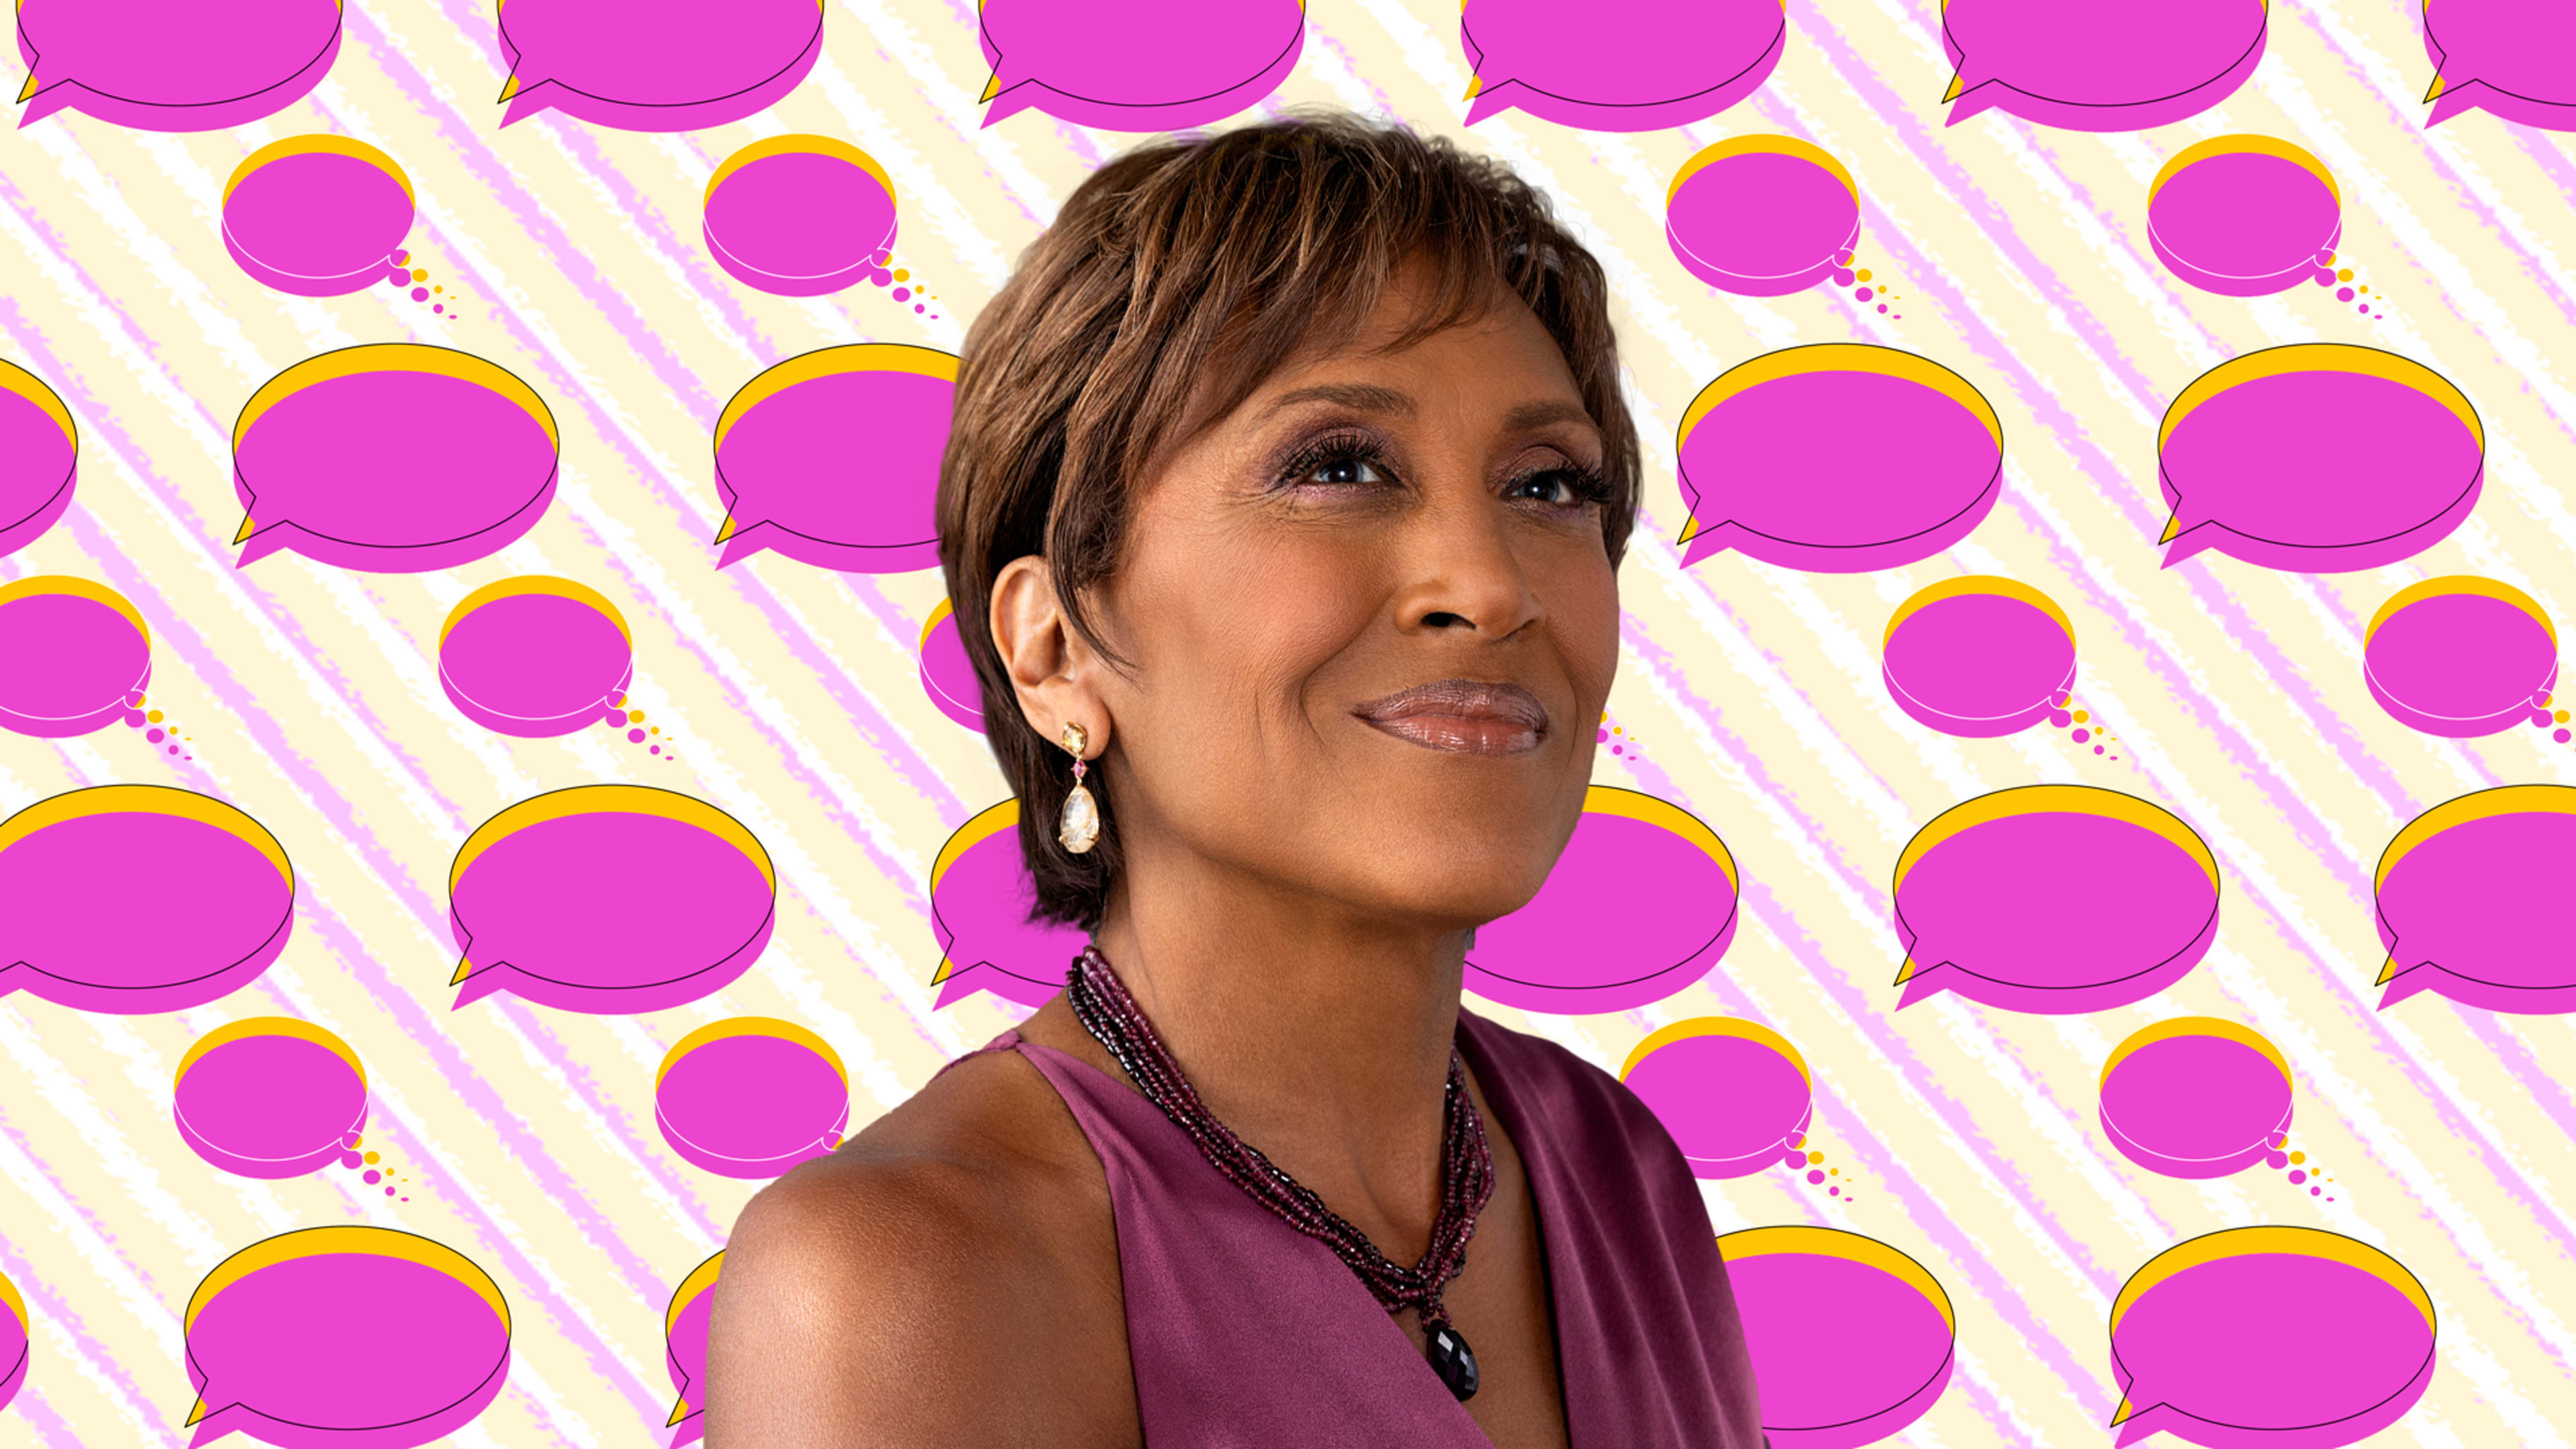 Robin Roberts’s new MasterClass will help you nail a job interview and master public speaking